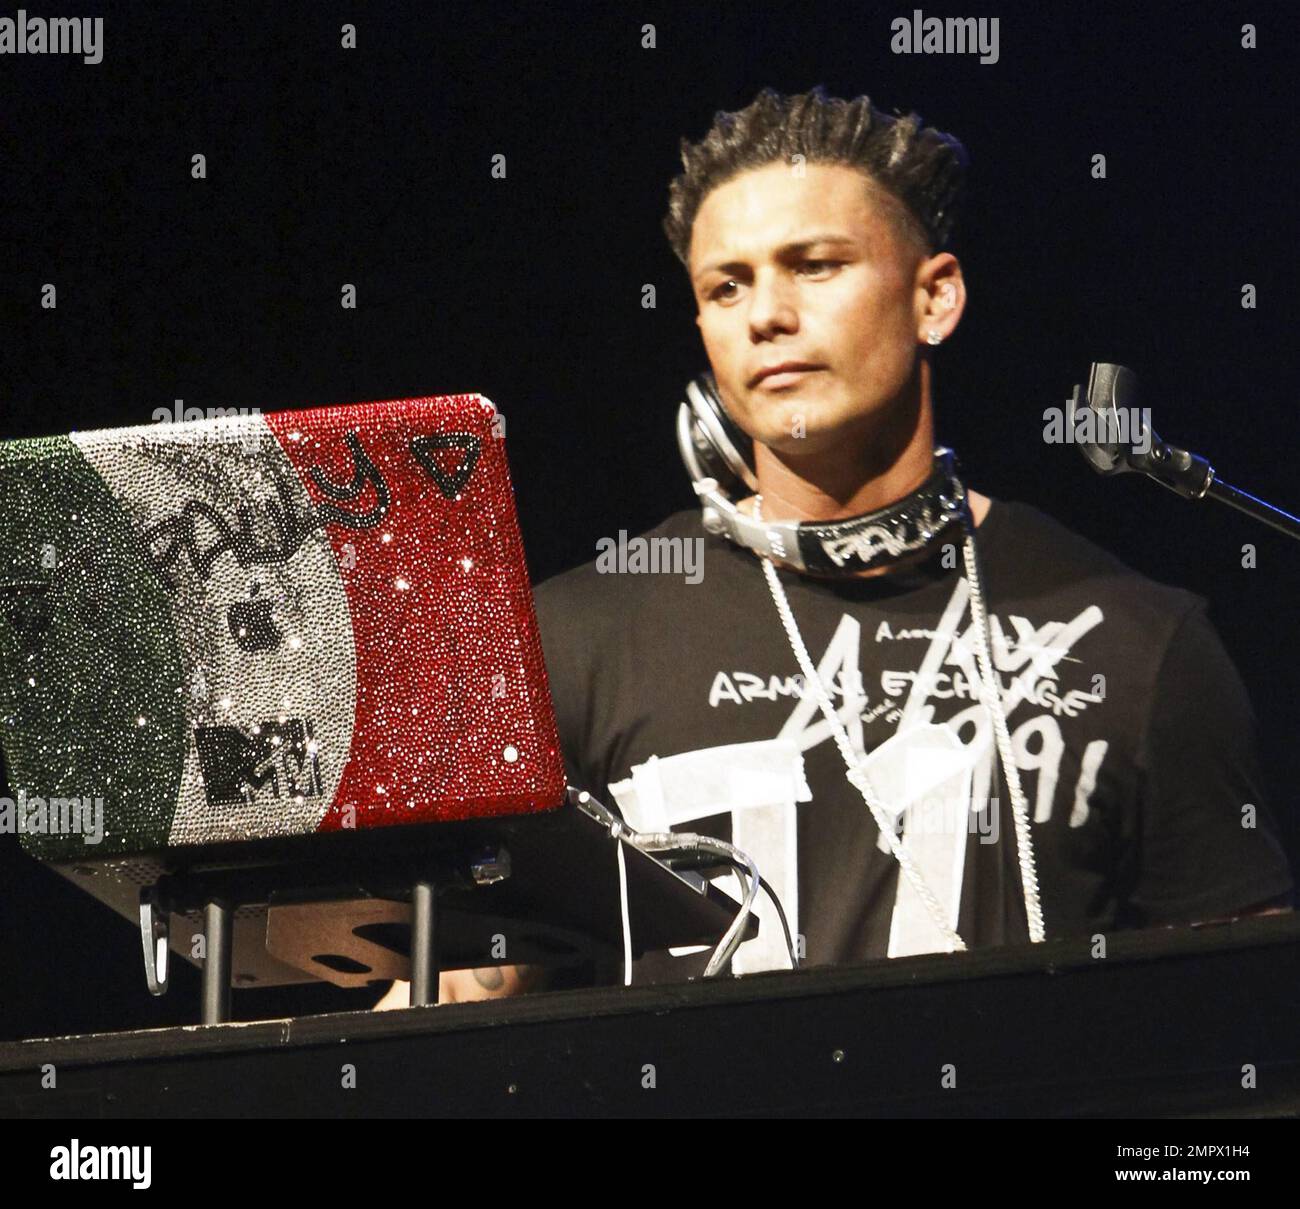 DJ Pauly D performs live in concert at the Sound Academy in